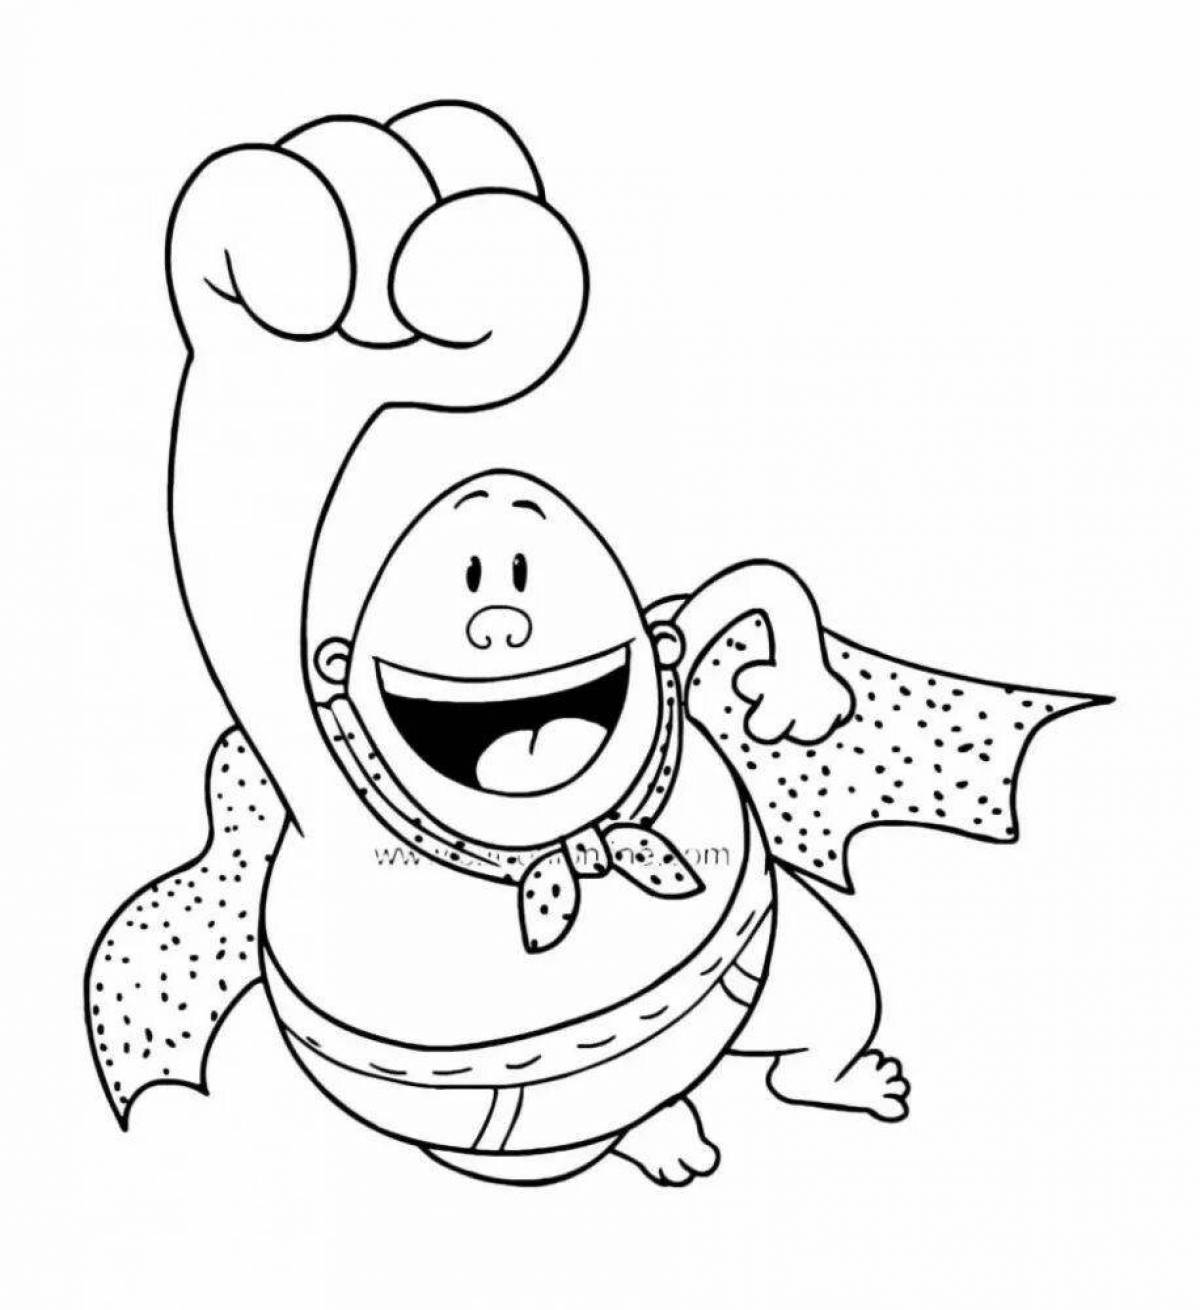 Luxurious captain coloring page